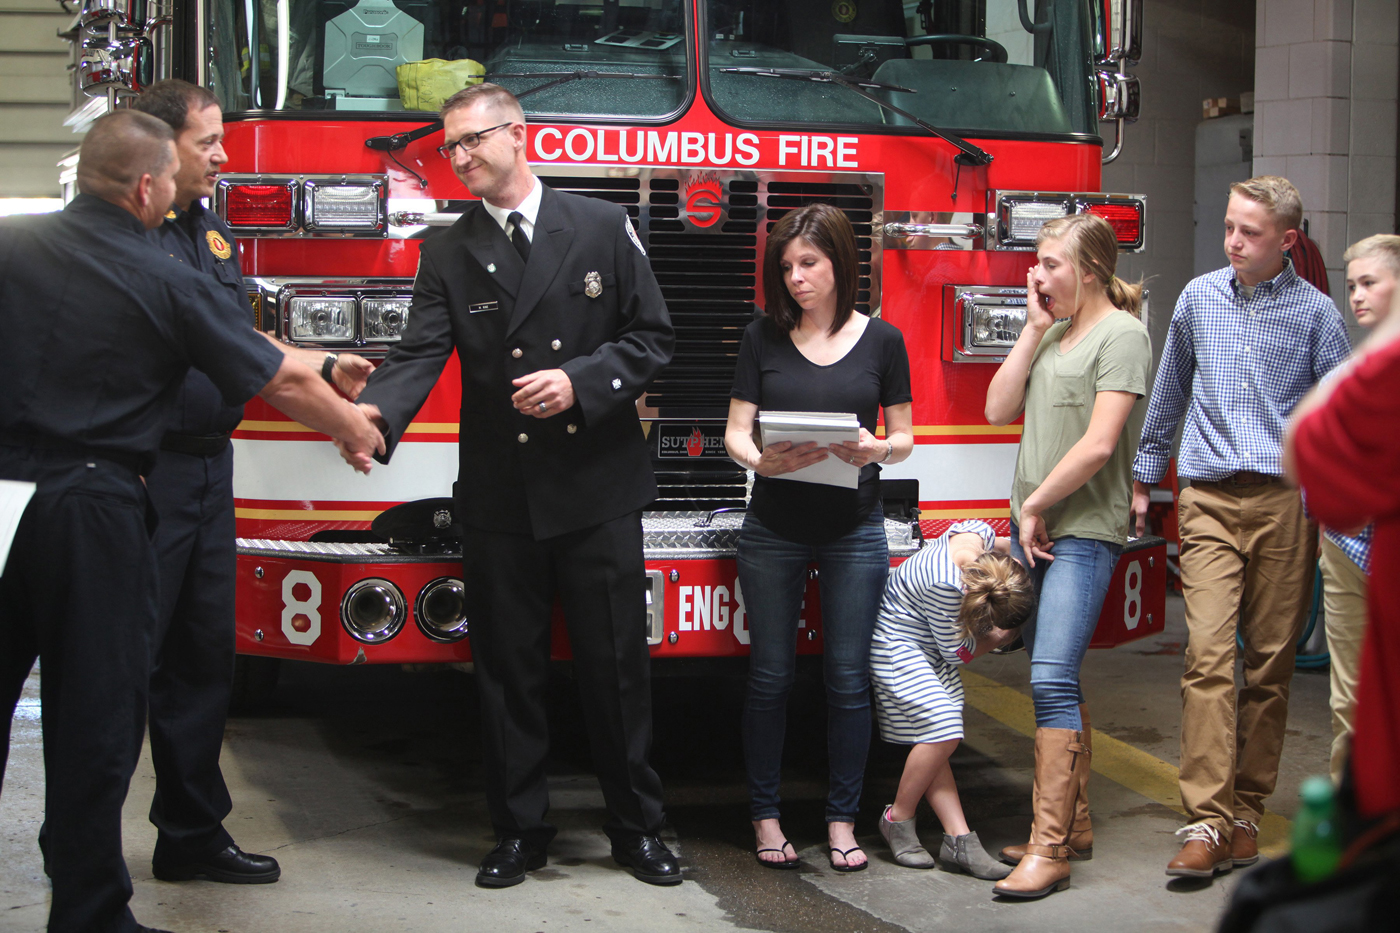 Mark Rine listens as a proclamation is read in his honor as he was named Firefighter of the Month on April 18, 2017. Beside Rine is his wife, Heather, and children Halle, Shelby, Blake and Cohen. The ceremony was held at his old firehouse, Station 8, at Long and Champion on the Near East Side. | Doral Chenoweth III